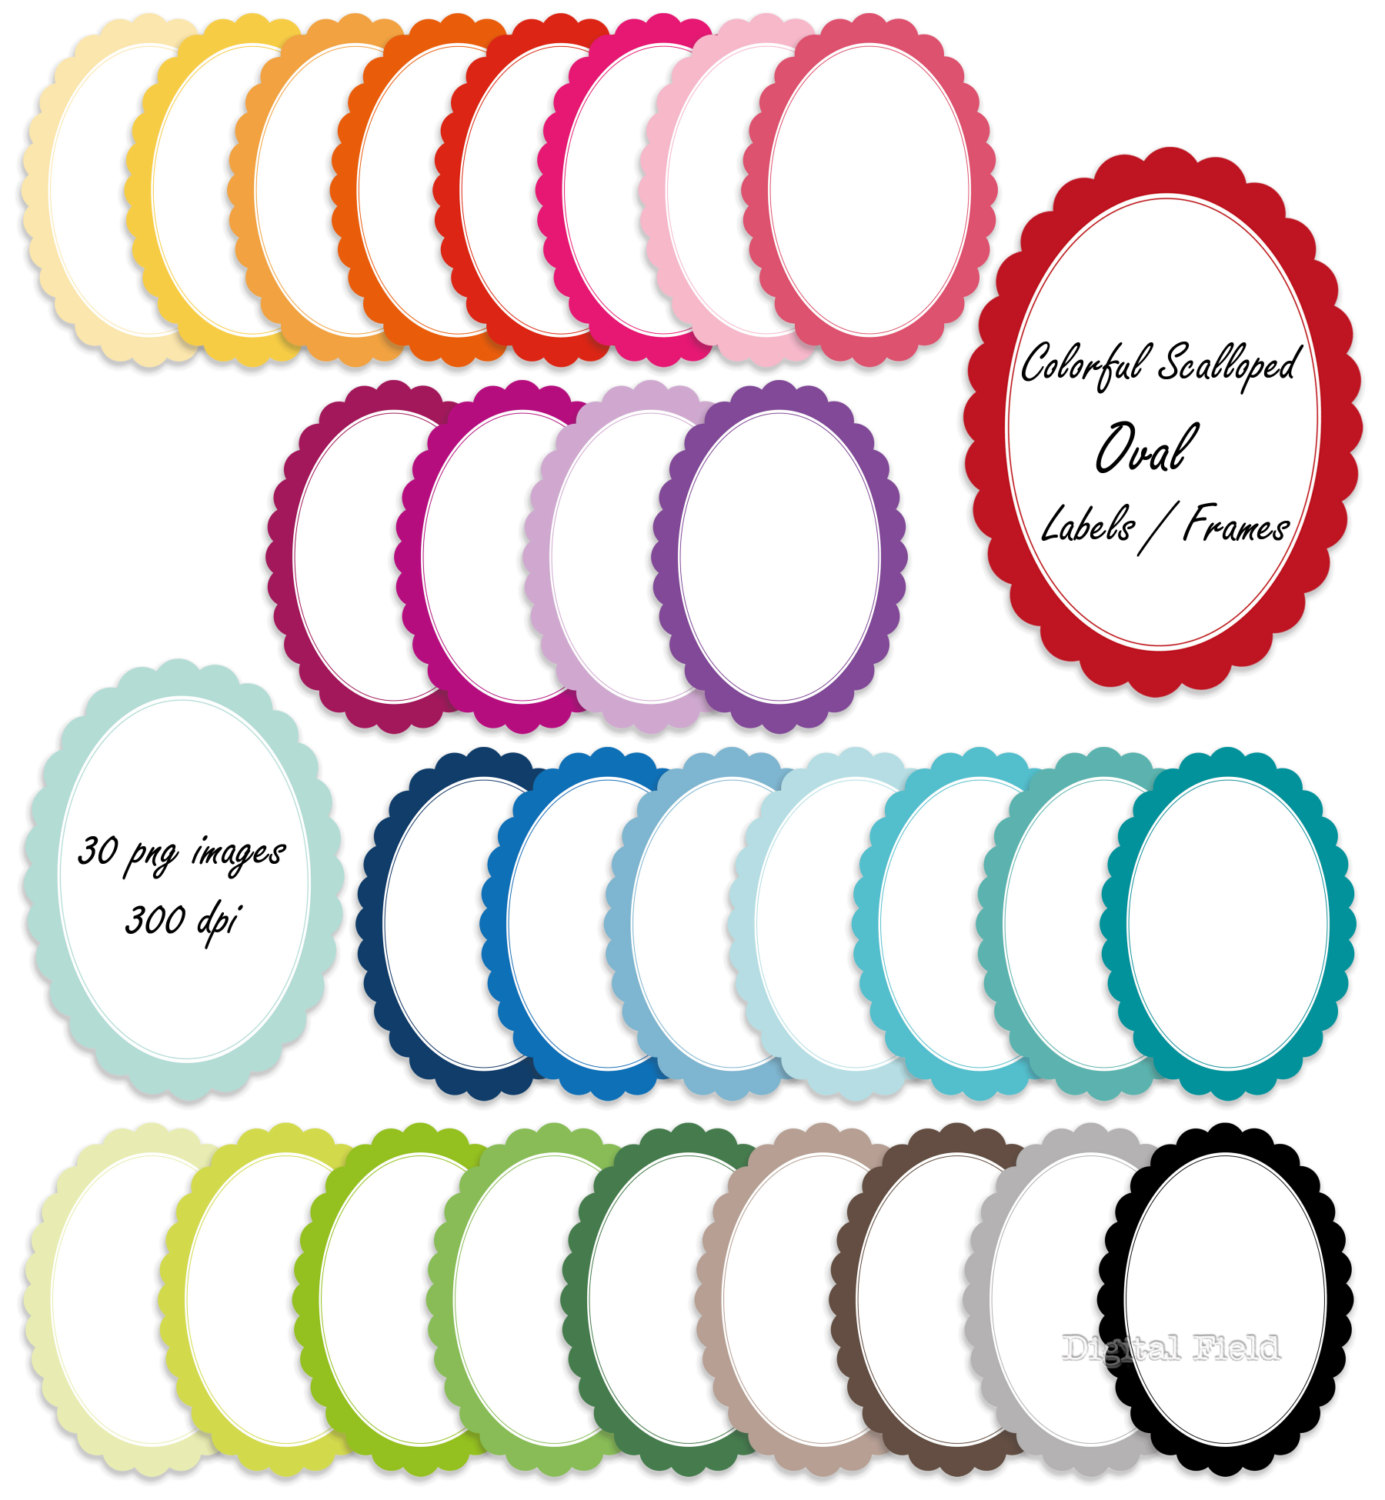 Colorful scalloped oval labels